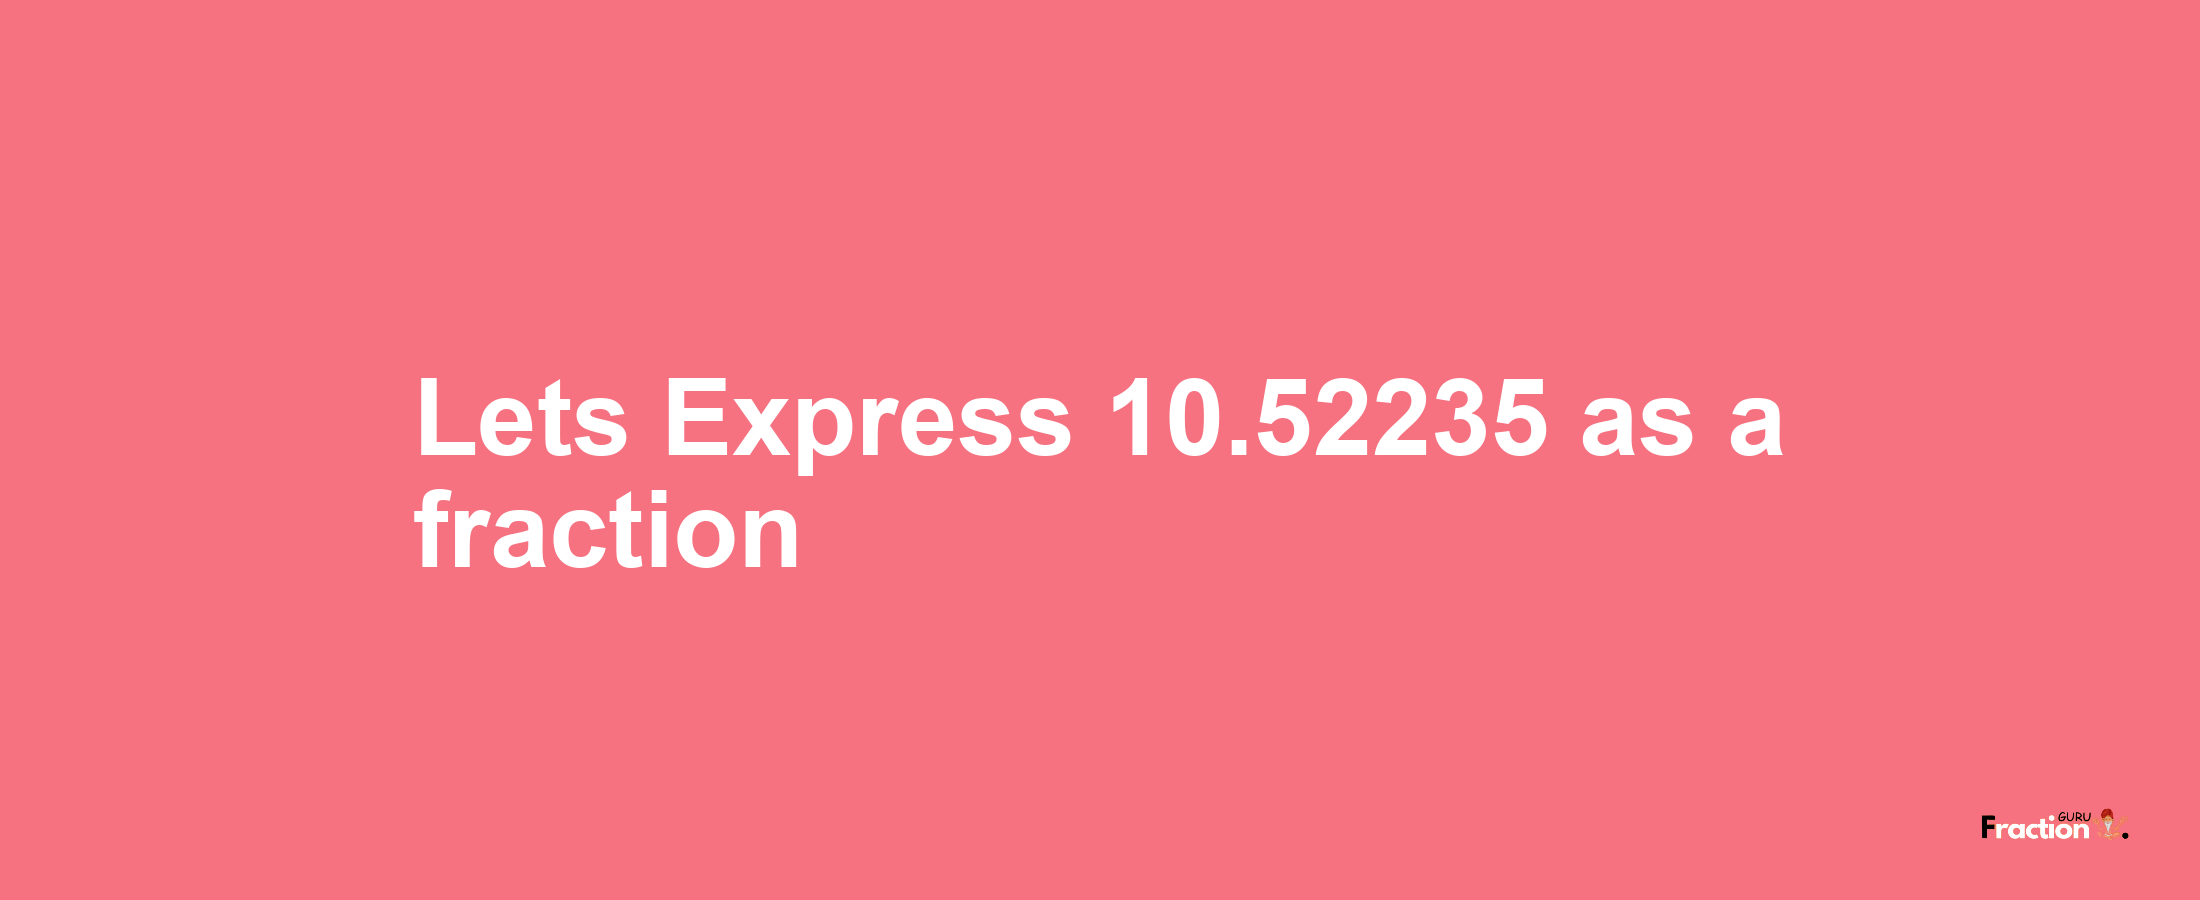 Lets Express 10.52235 as afraction